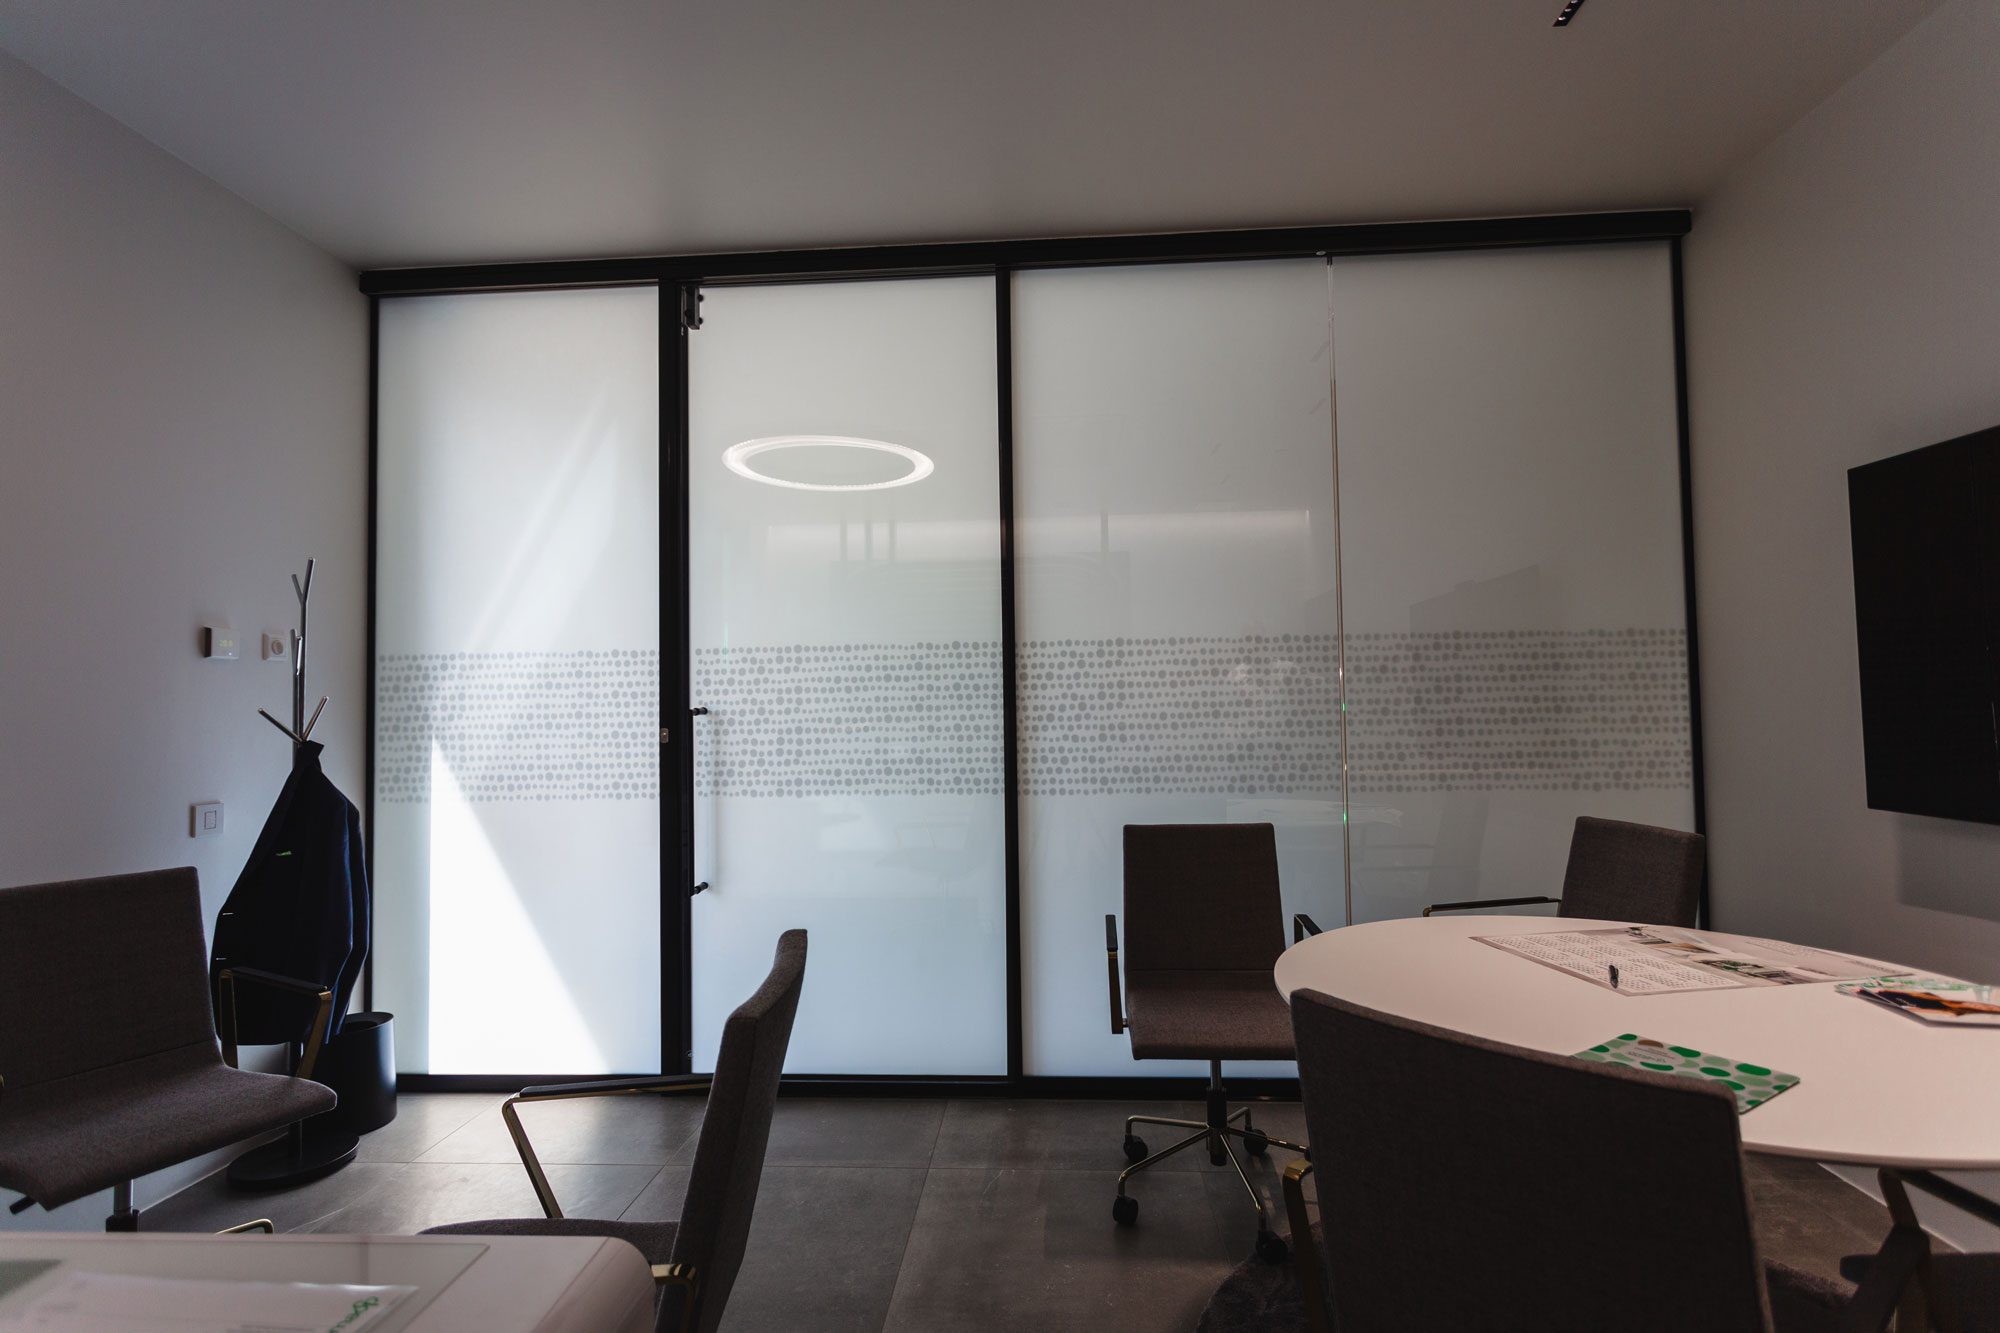 Scanmikael Office glass walls_Electrically dimmable Smart glass walls_OmaSp, Seinäjoki, Finland